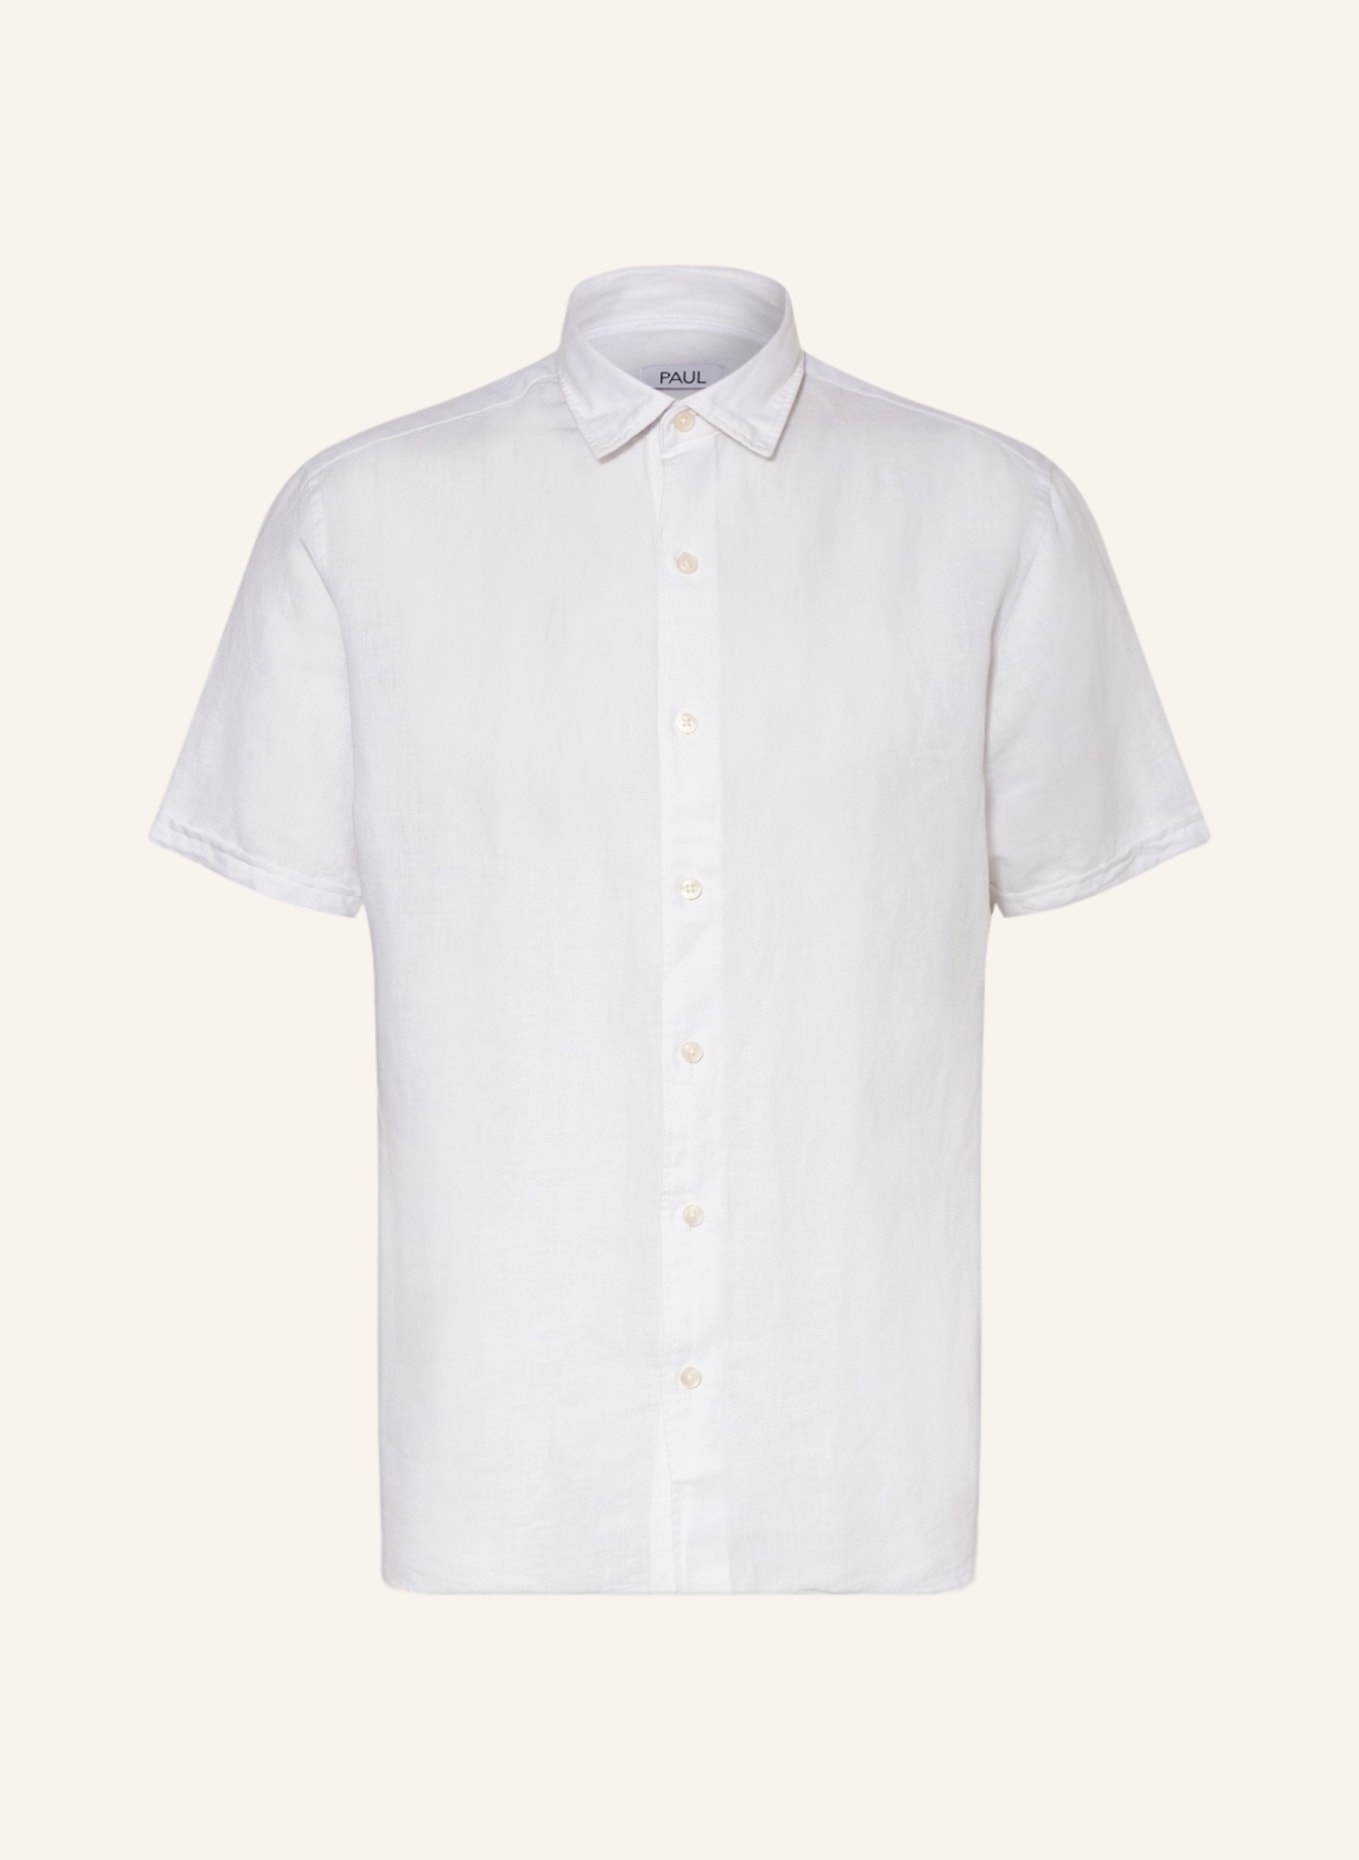 PAUL Short sleeve shirt comfort fit with linen, Color: WHITE (Image 1)